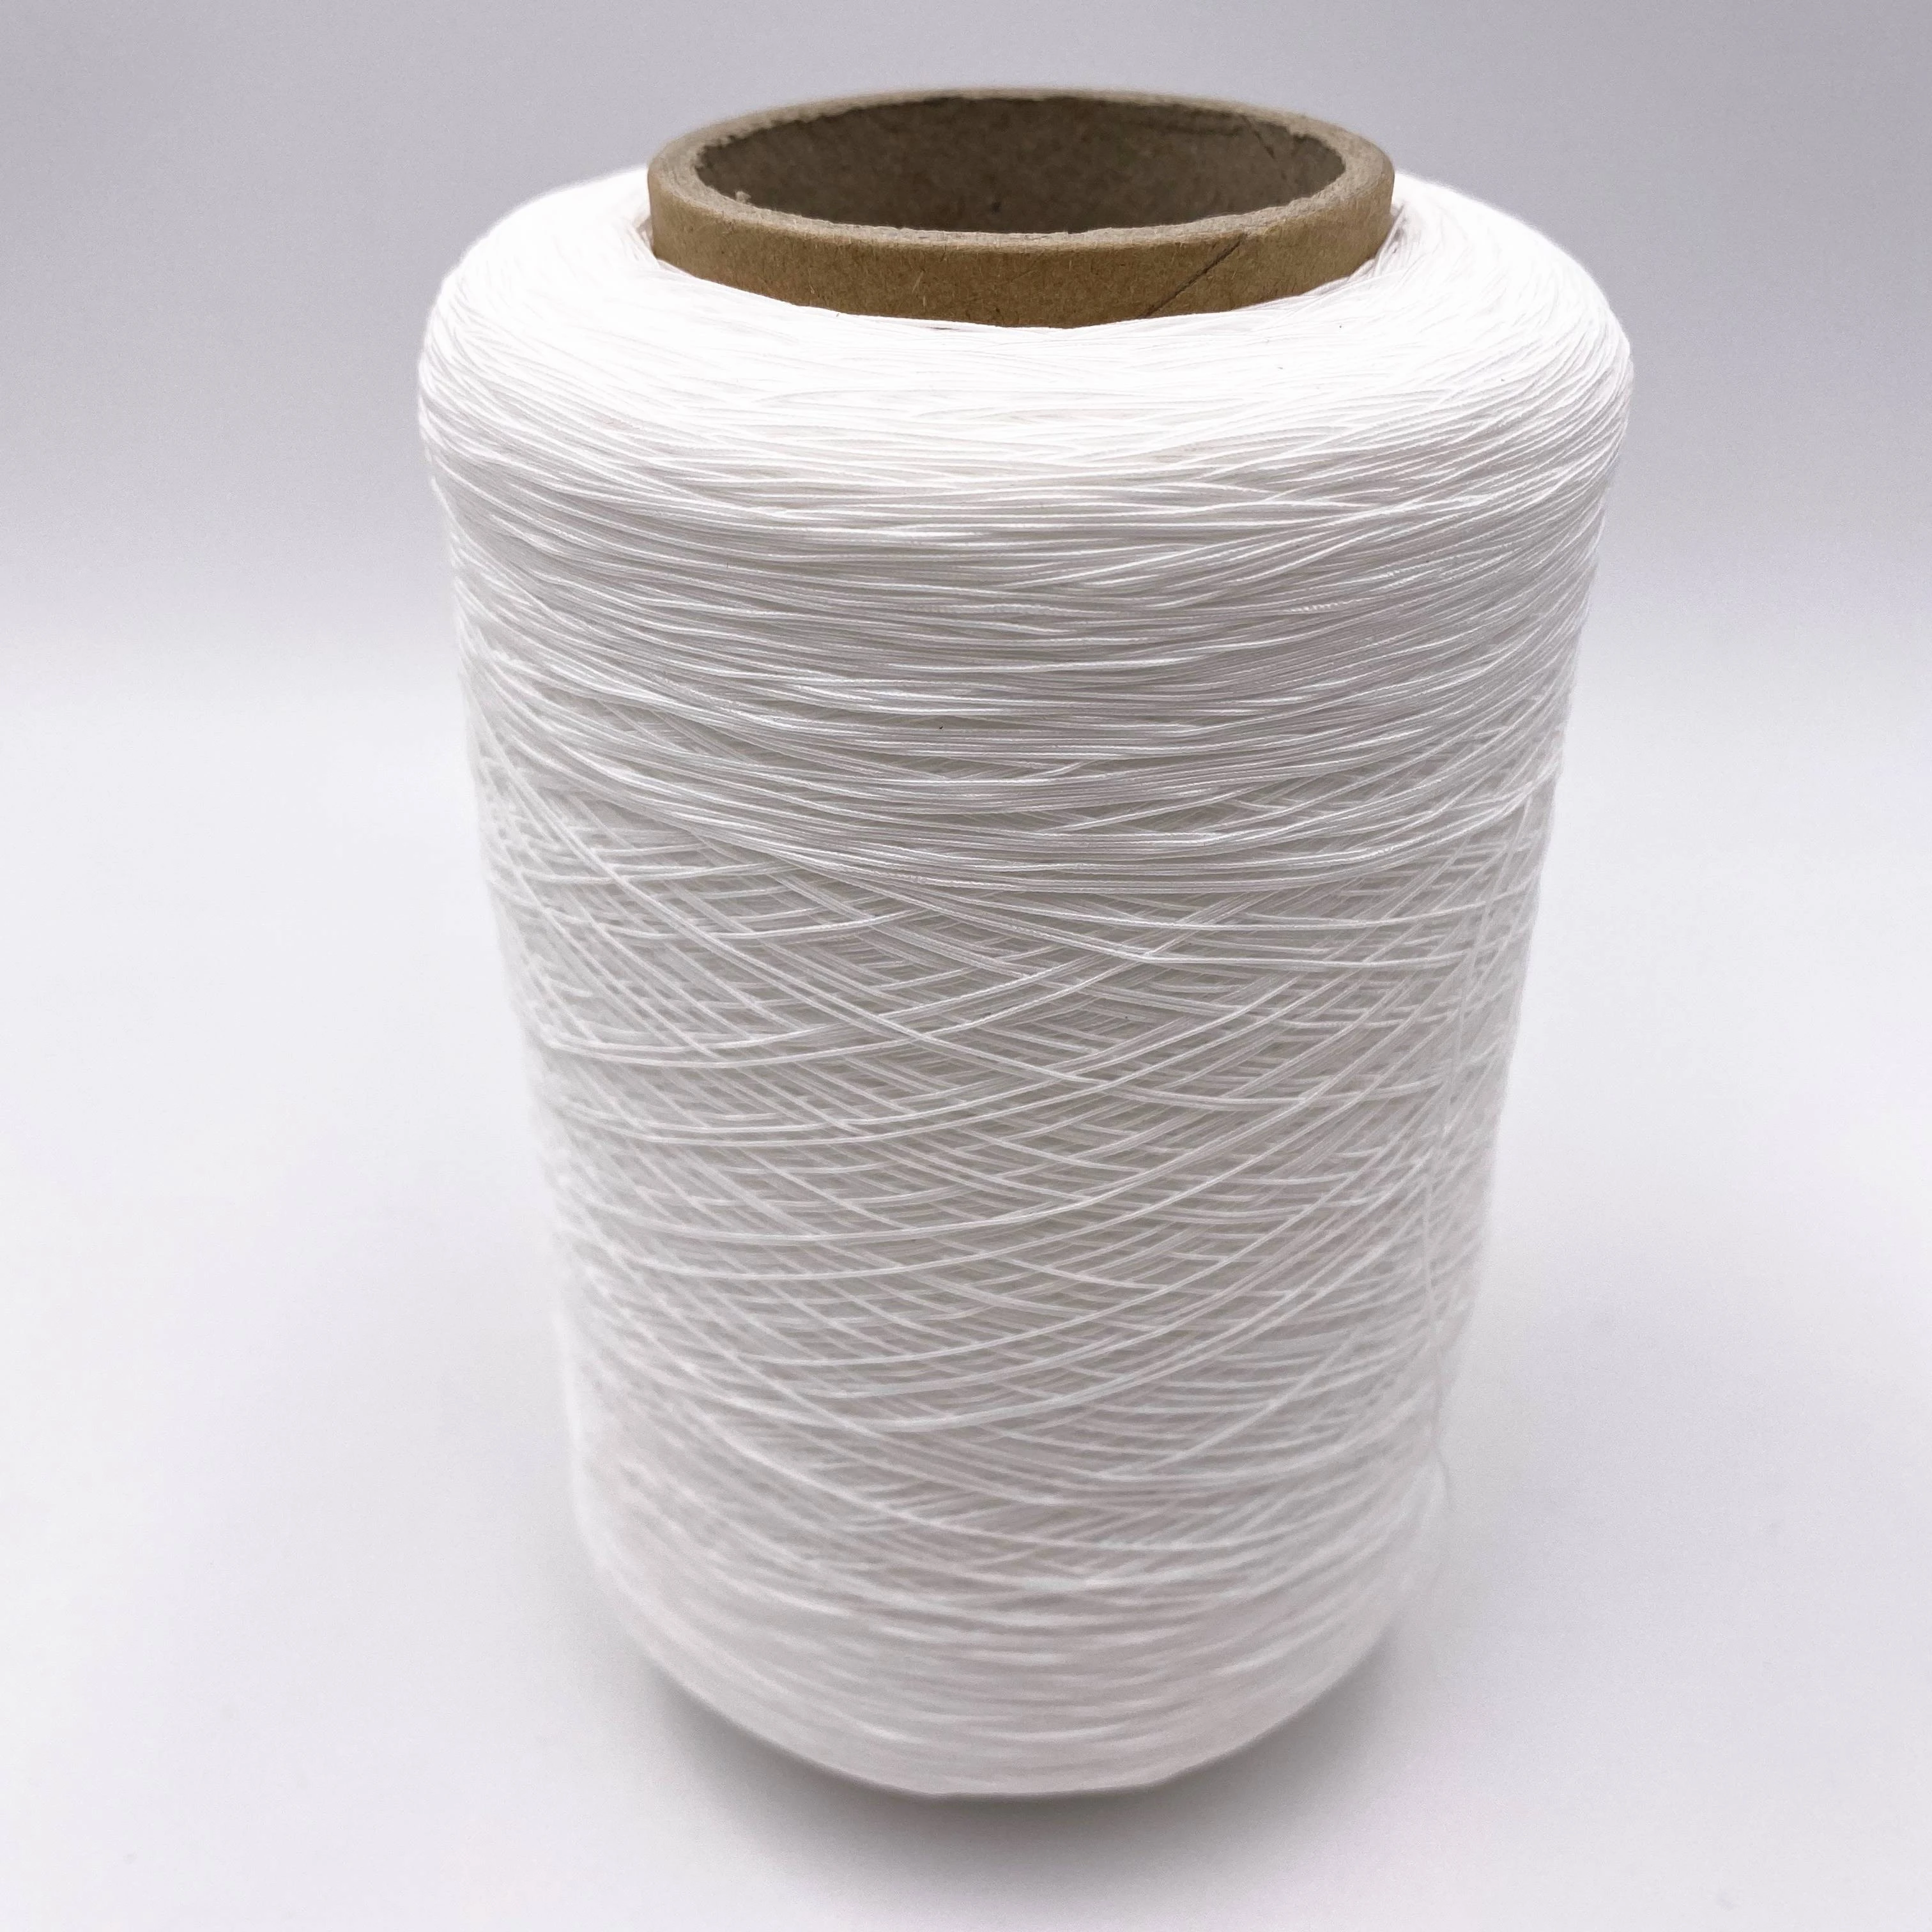 840D/70D*2 nylon DCY nylon spandex double covering covered yarn rubber yarn for rib, socks, clothes